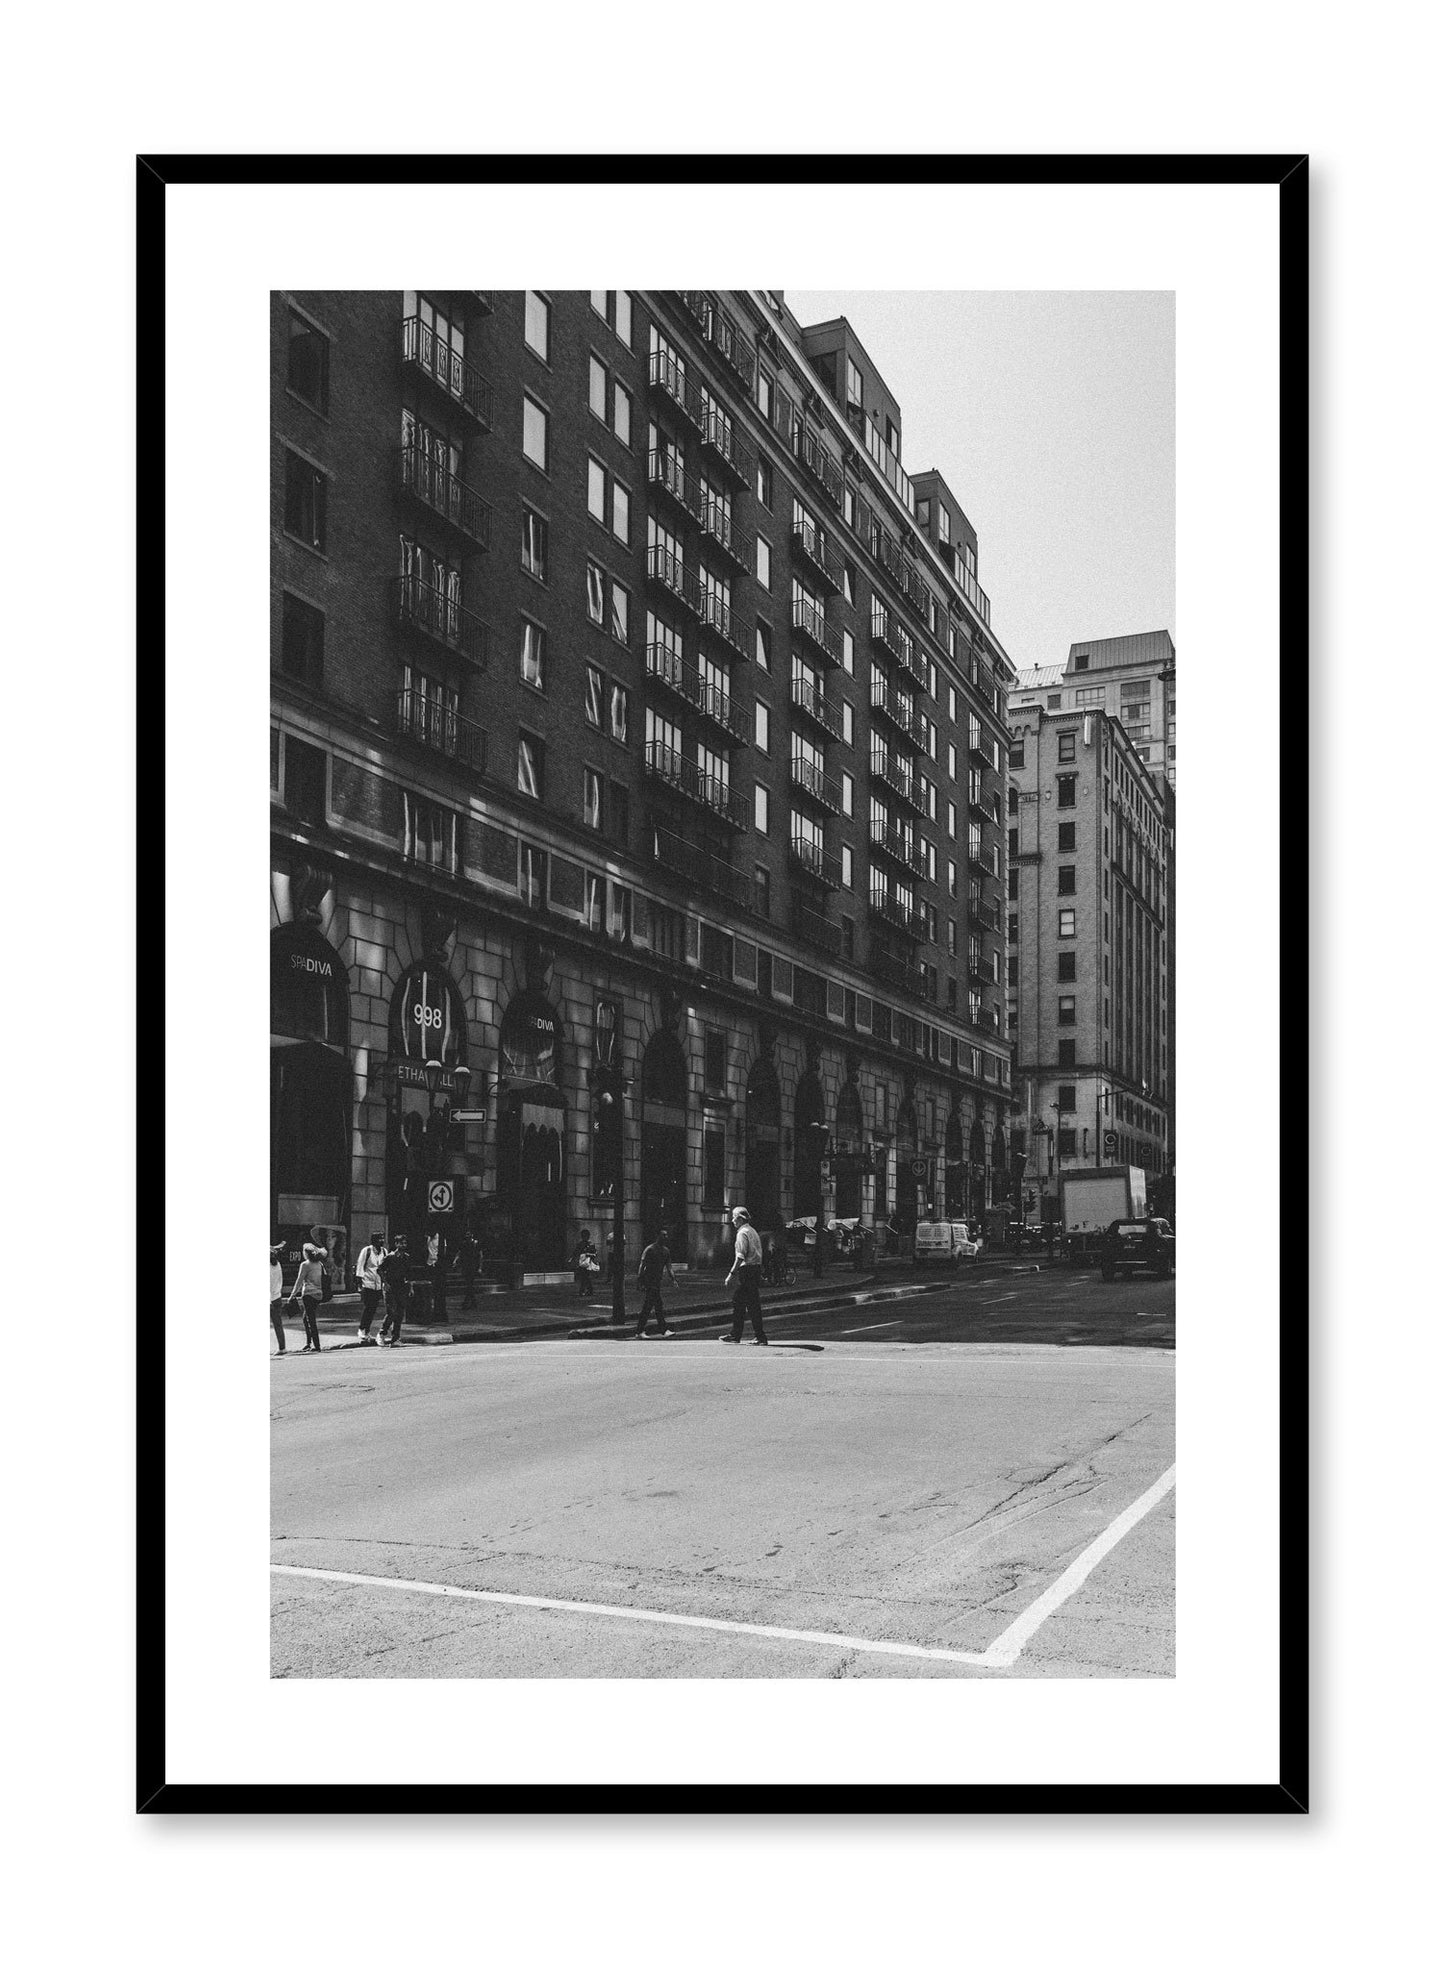 Minimalist design poster by Opposite Wall with black and white urban street photography in Montreal Canada